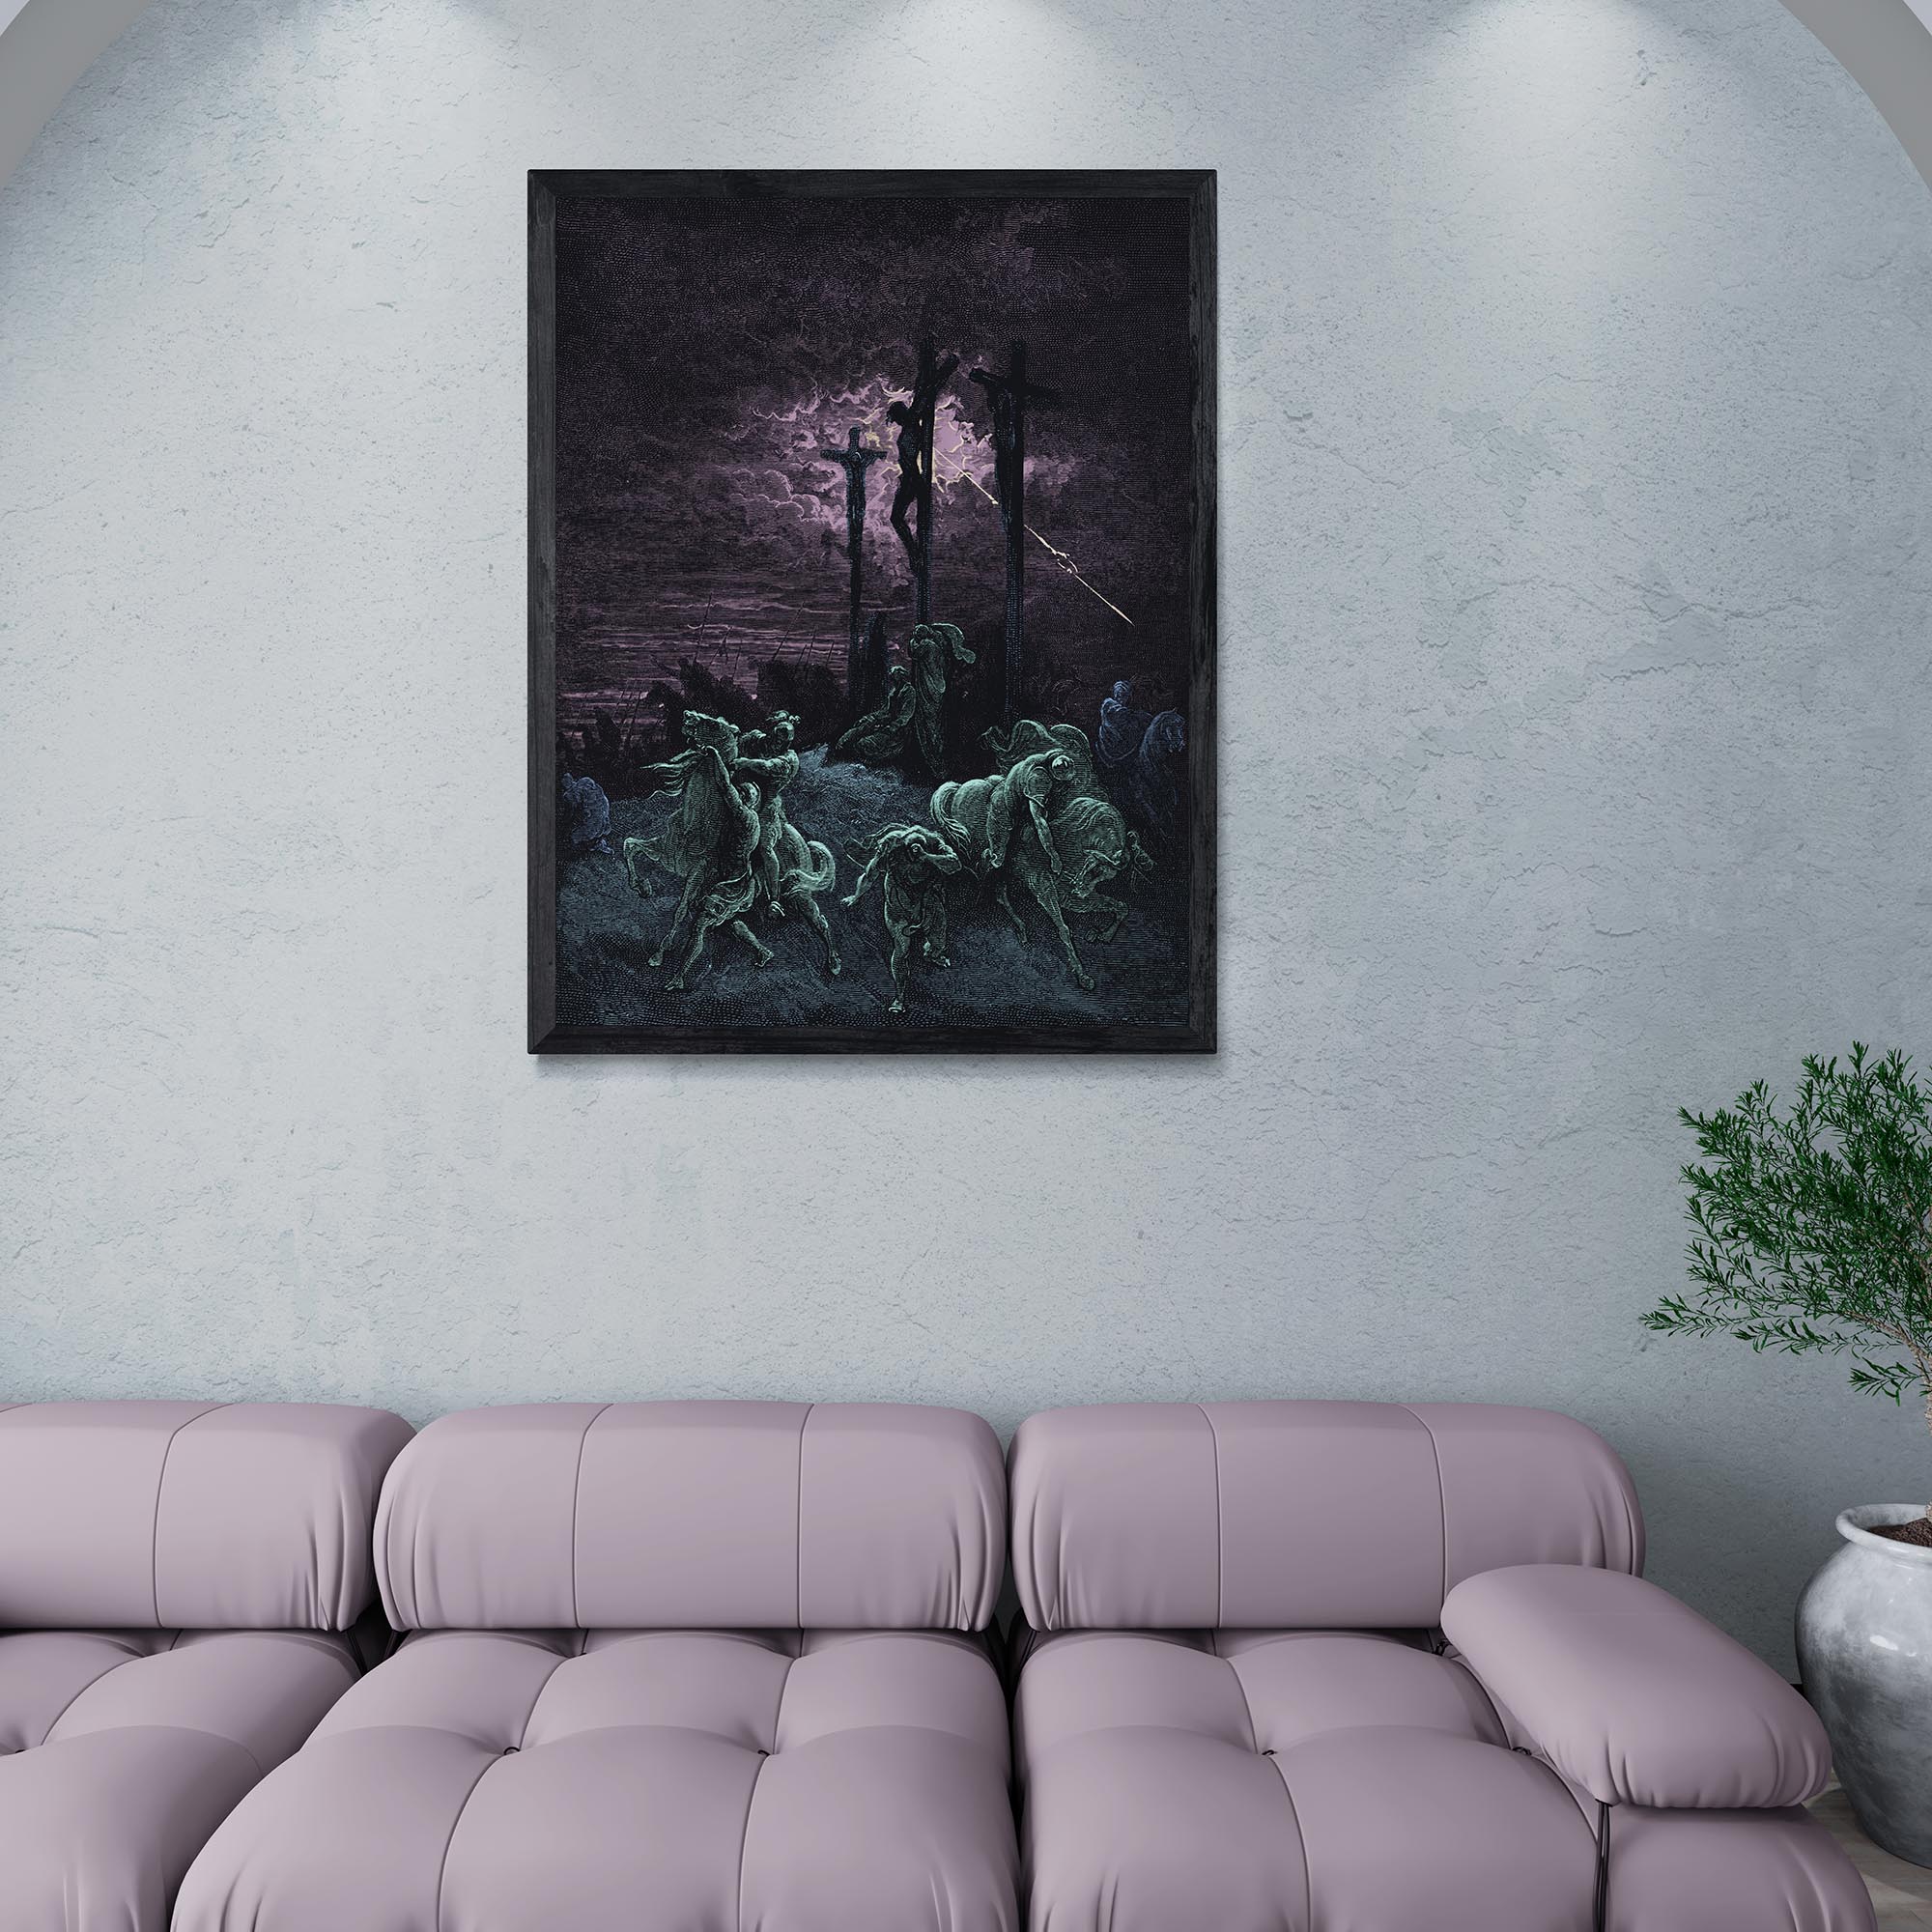 Fine art Darkness at the Crucifixion | Gustave Dore Paradise Lost, Dante | Surreal Full Color Eerie Christ Fine Art Print